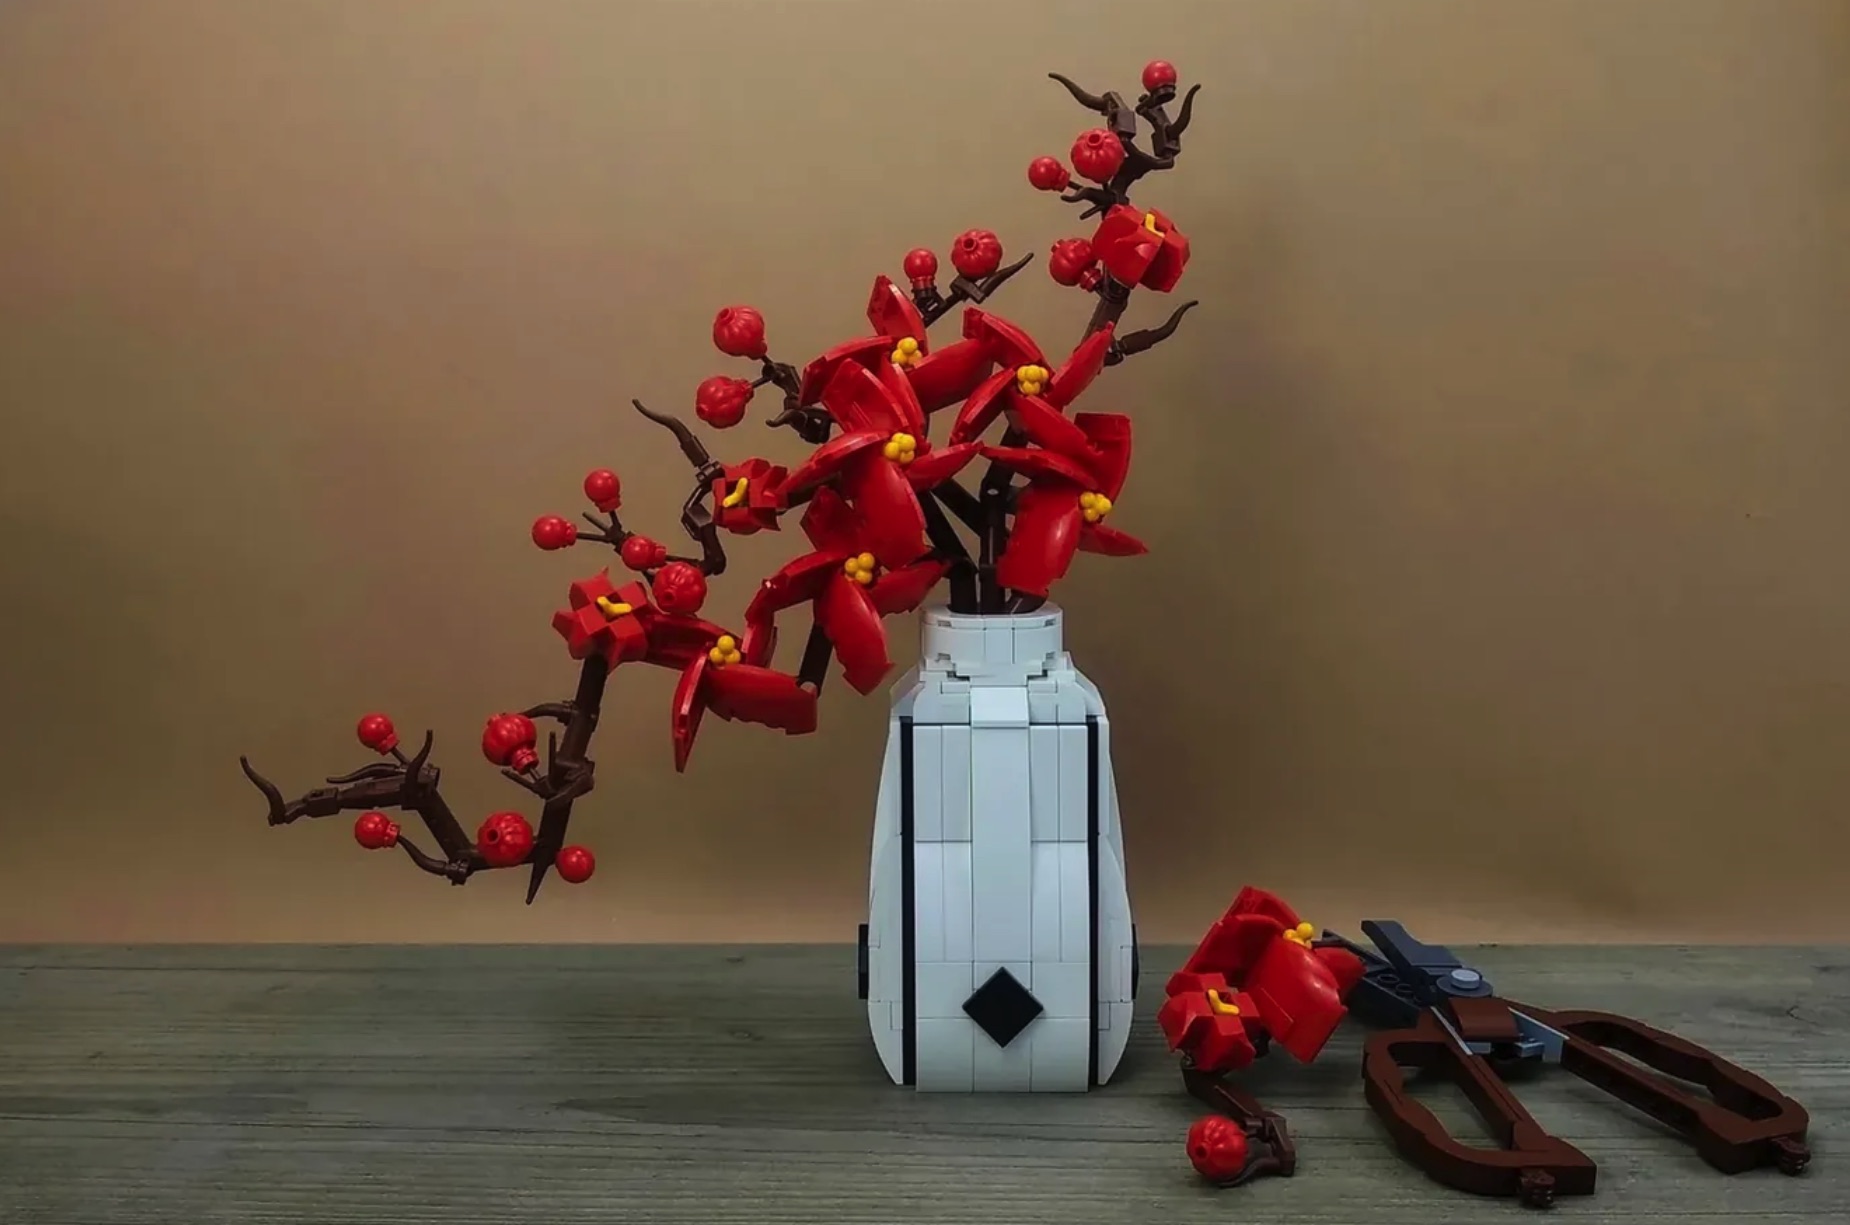 Wicked Brick Launch Display Vases For LEGO Flowers! – The Brick Post!